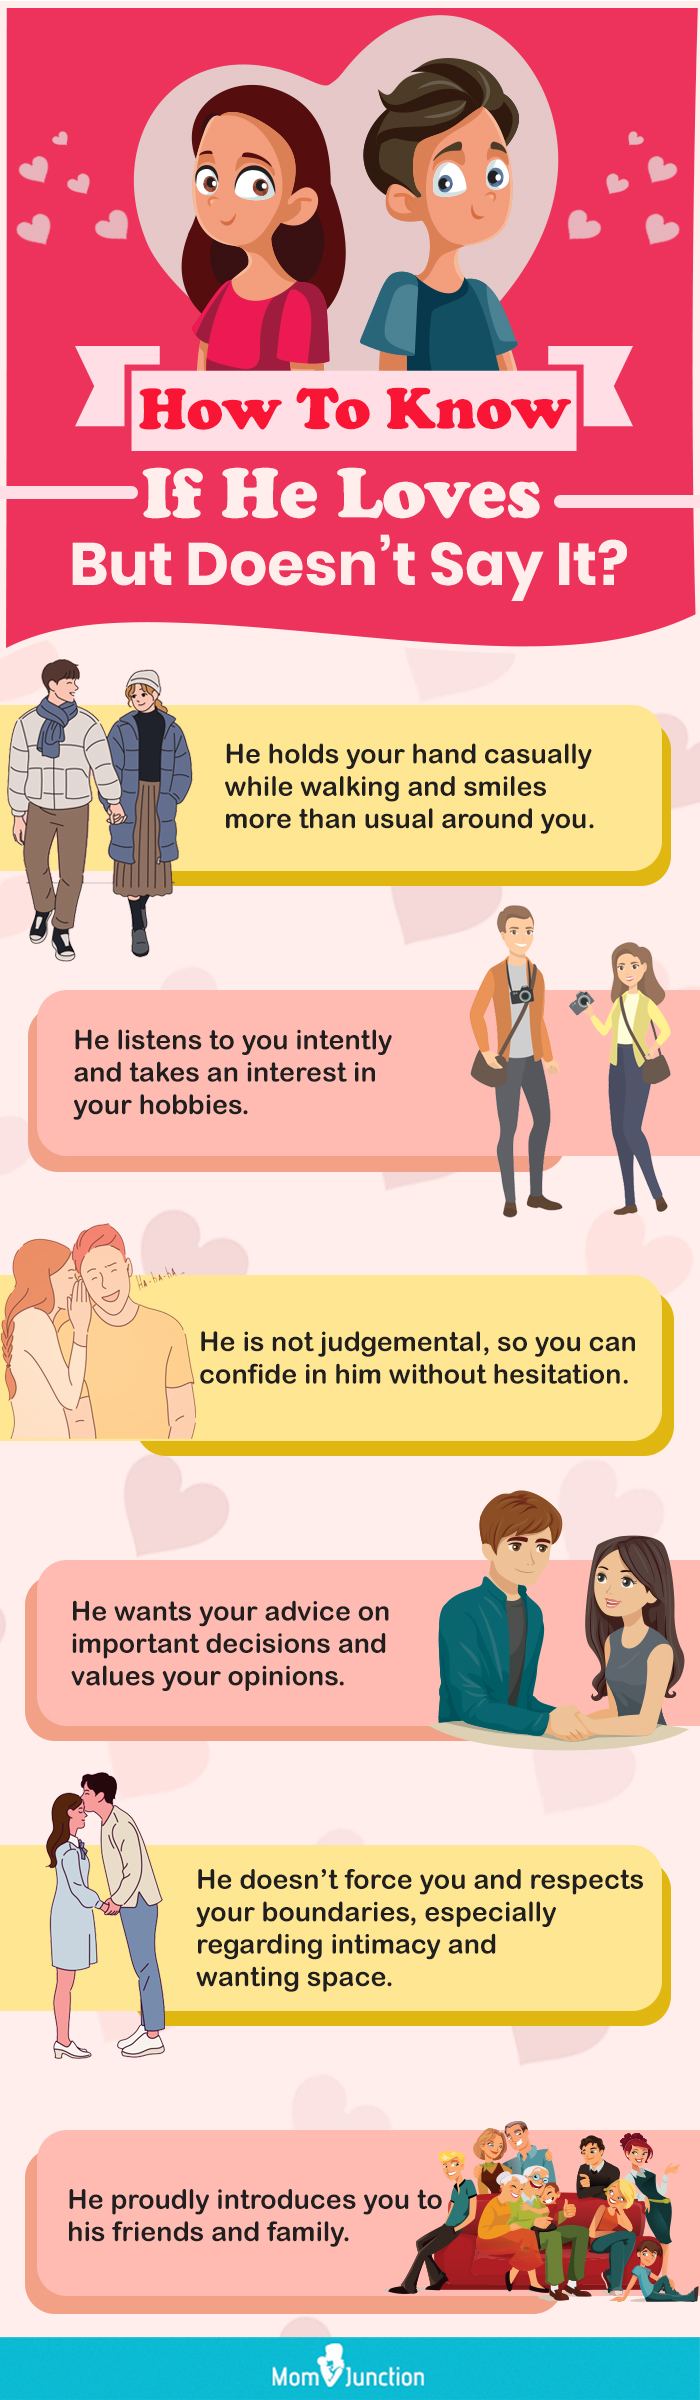 how to know if he loves but doesnt say it (infographic)